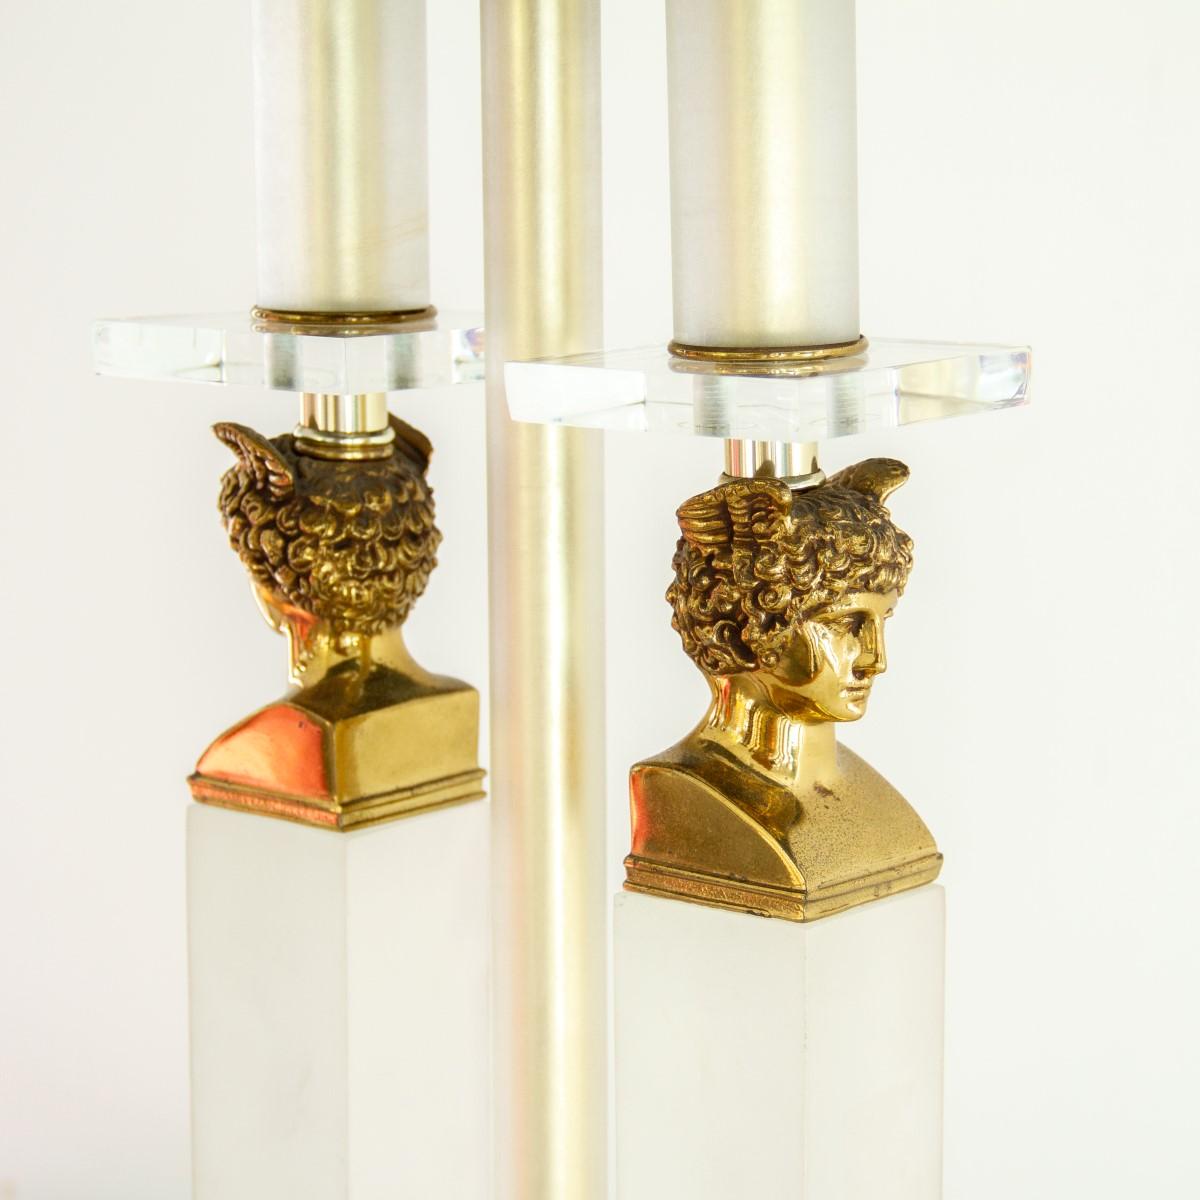 A single neoclassical style lamp with two frosted lucite columns, topped with brass coloured Hermes heads and sat on a clear and frosted lucite base, 1970s.

Light scratches and tarnishing. 

Currently on display in our London Collection, at The